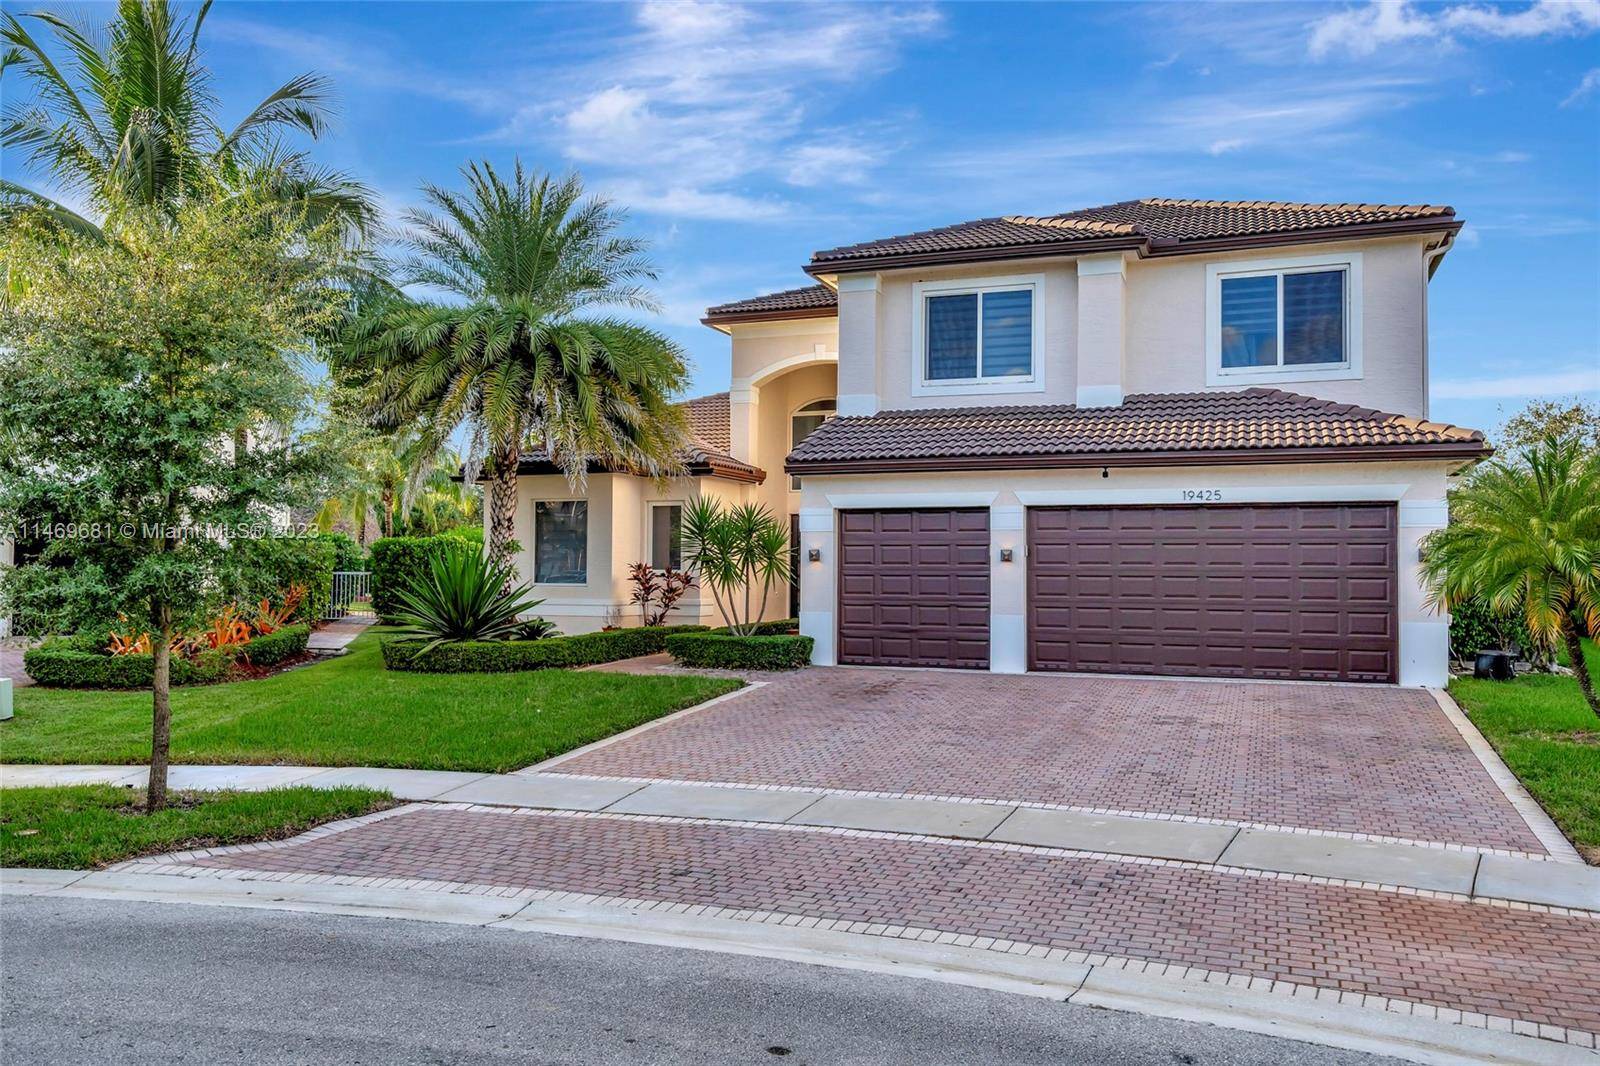 Welcome to a truly MAGNIFICENT luxury 2 story home, in the highly desired Sunset Lakes gated community.